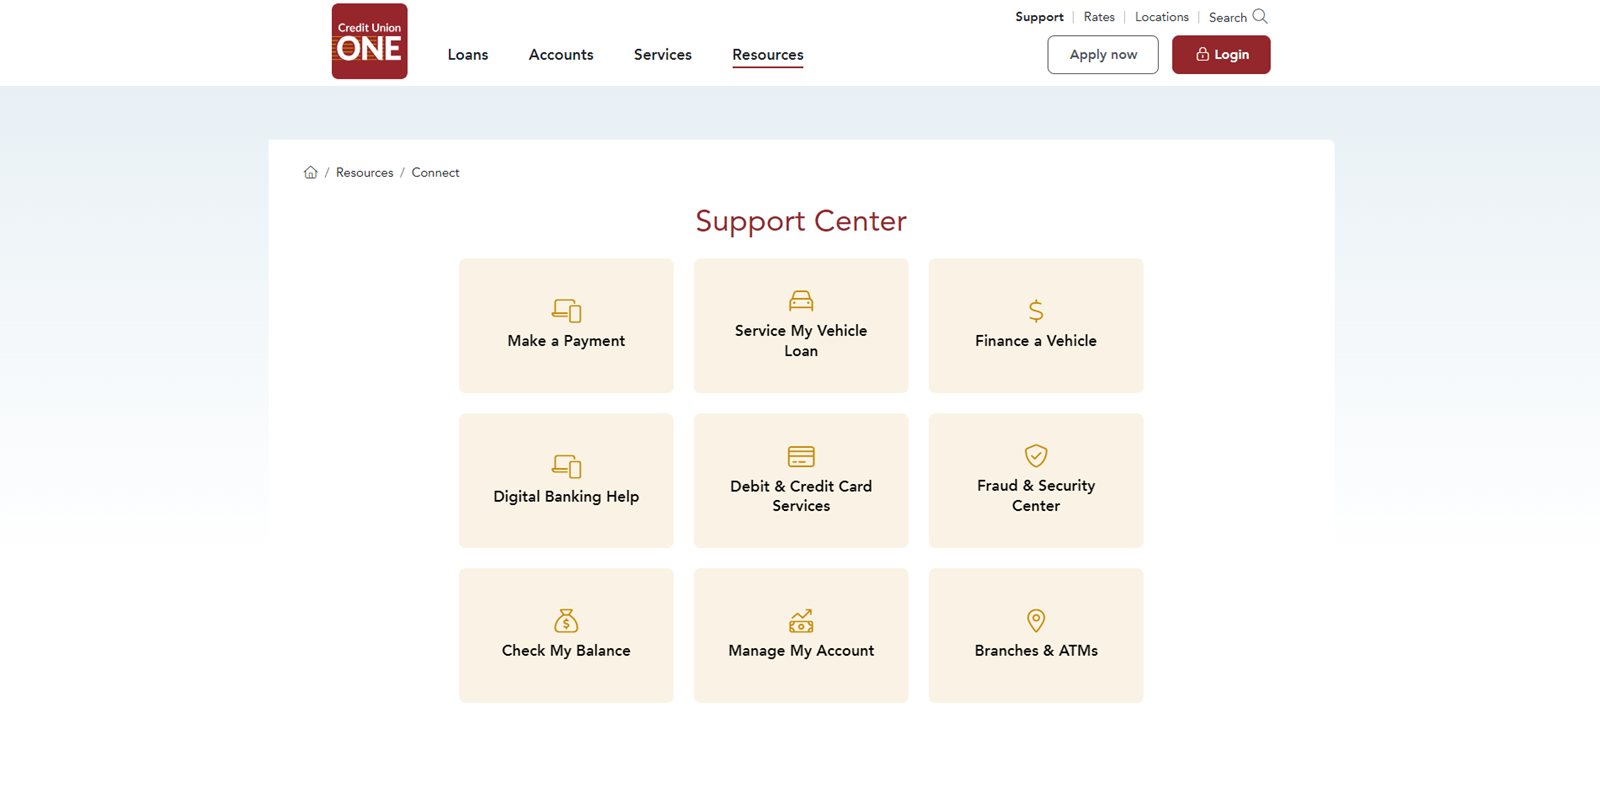 The new member support center